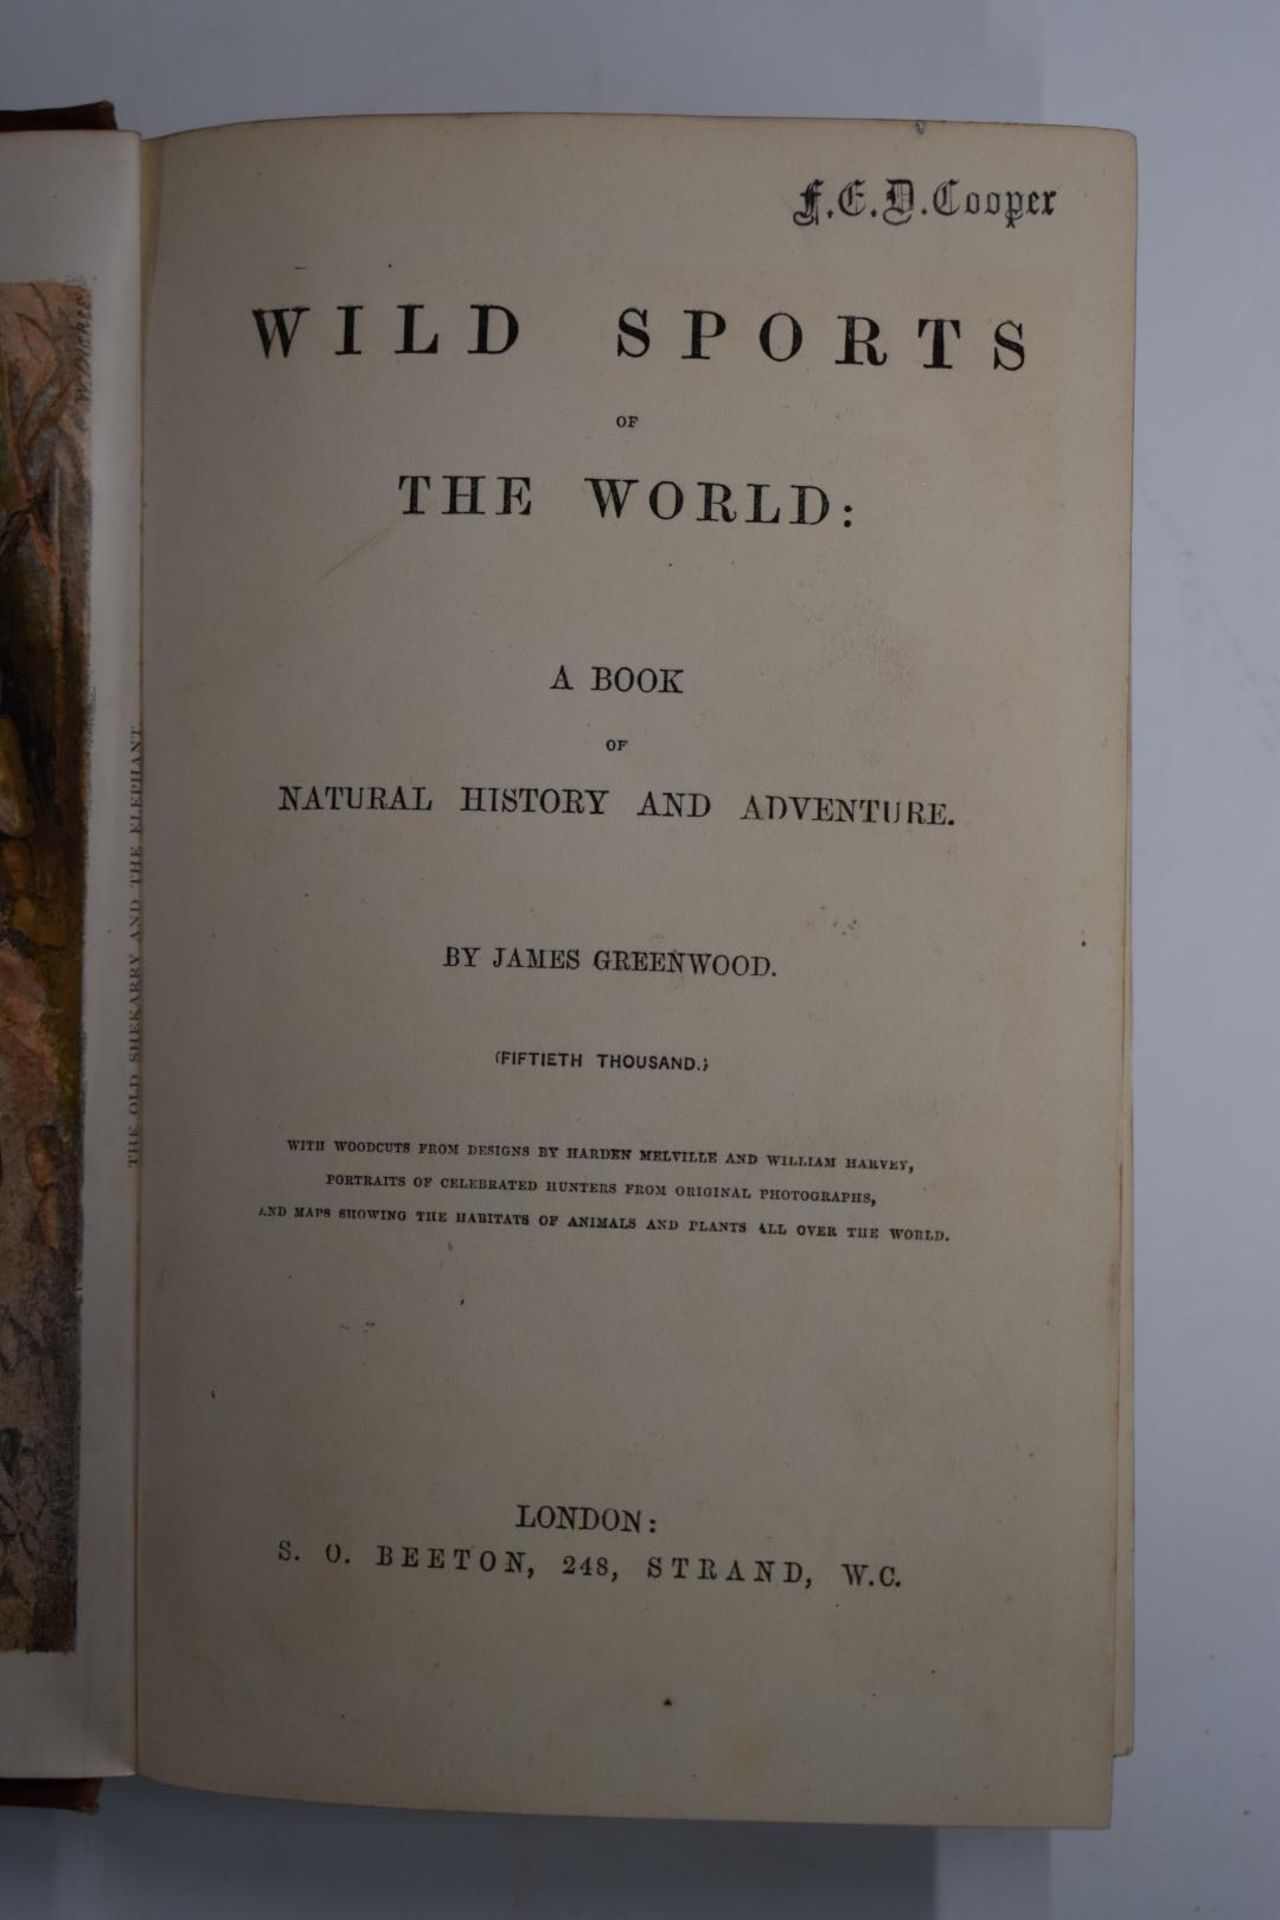 Wild Sports of the World, A Book of Natural History and Adventure by James Greenwood with - Image 2 of 2